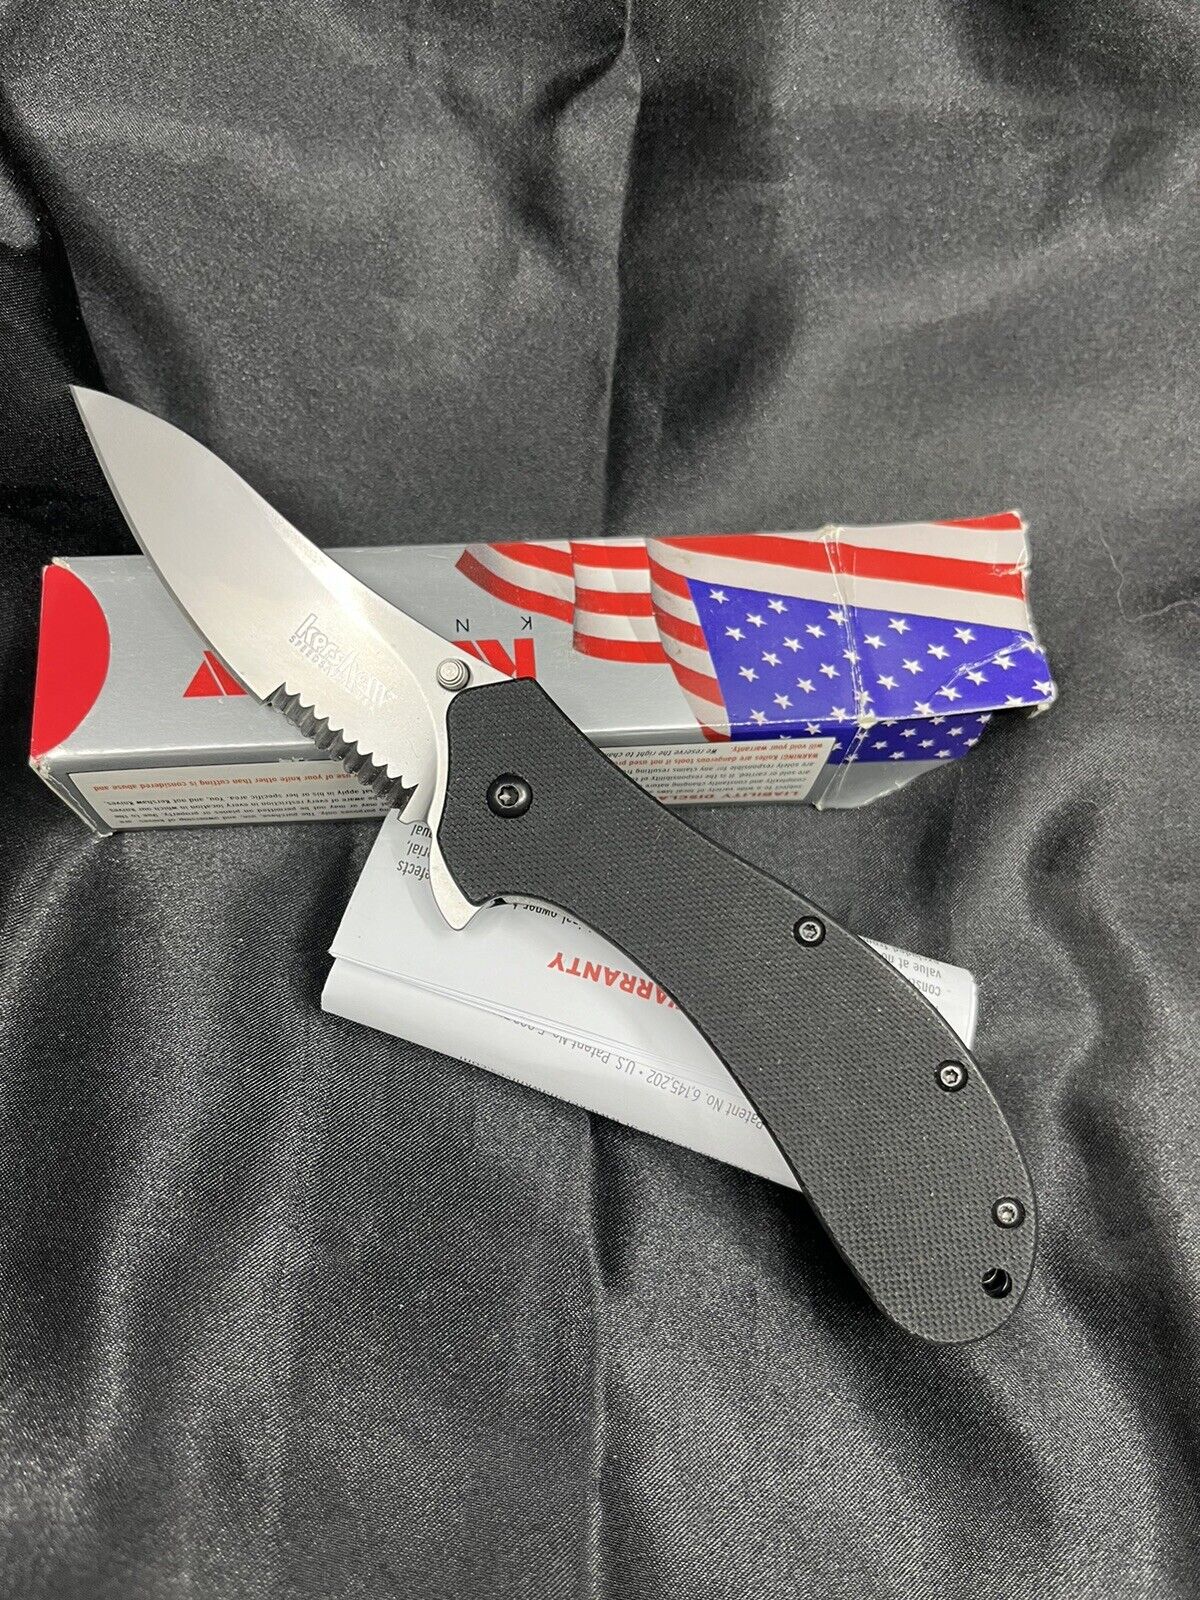 KERSHAW KNIFE 1665ST PACKRAT FIRST PRODUCTION 1 OF 500